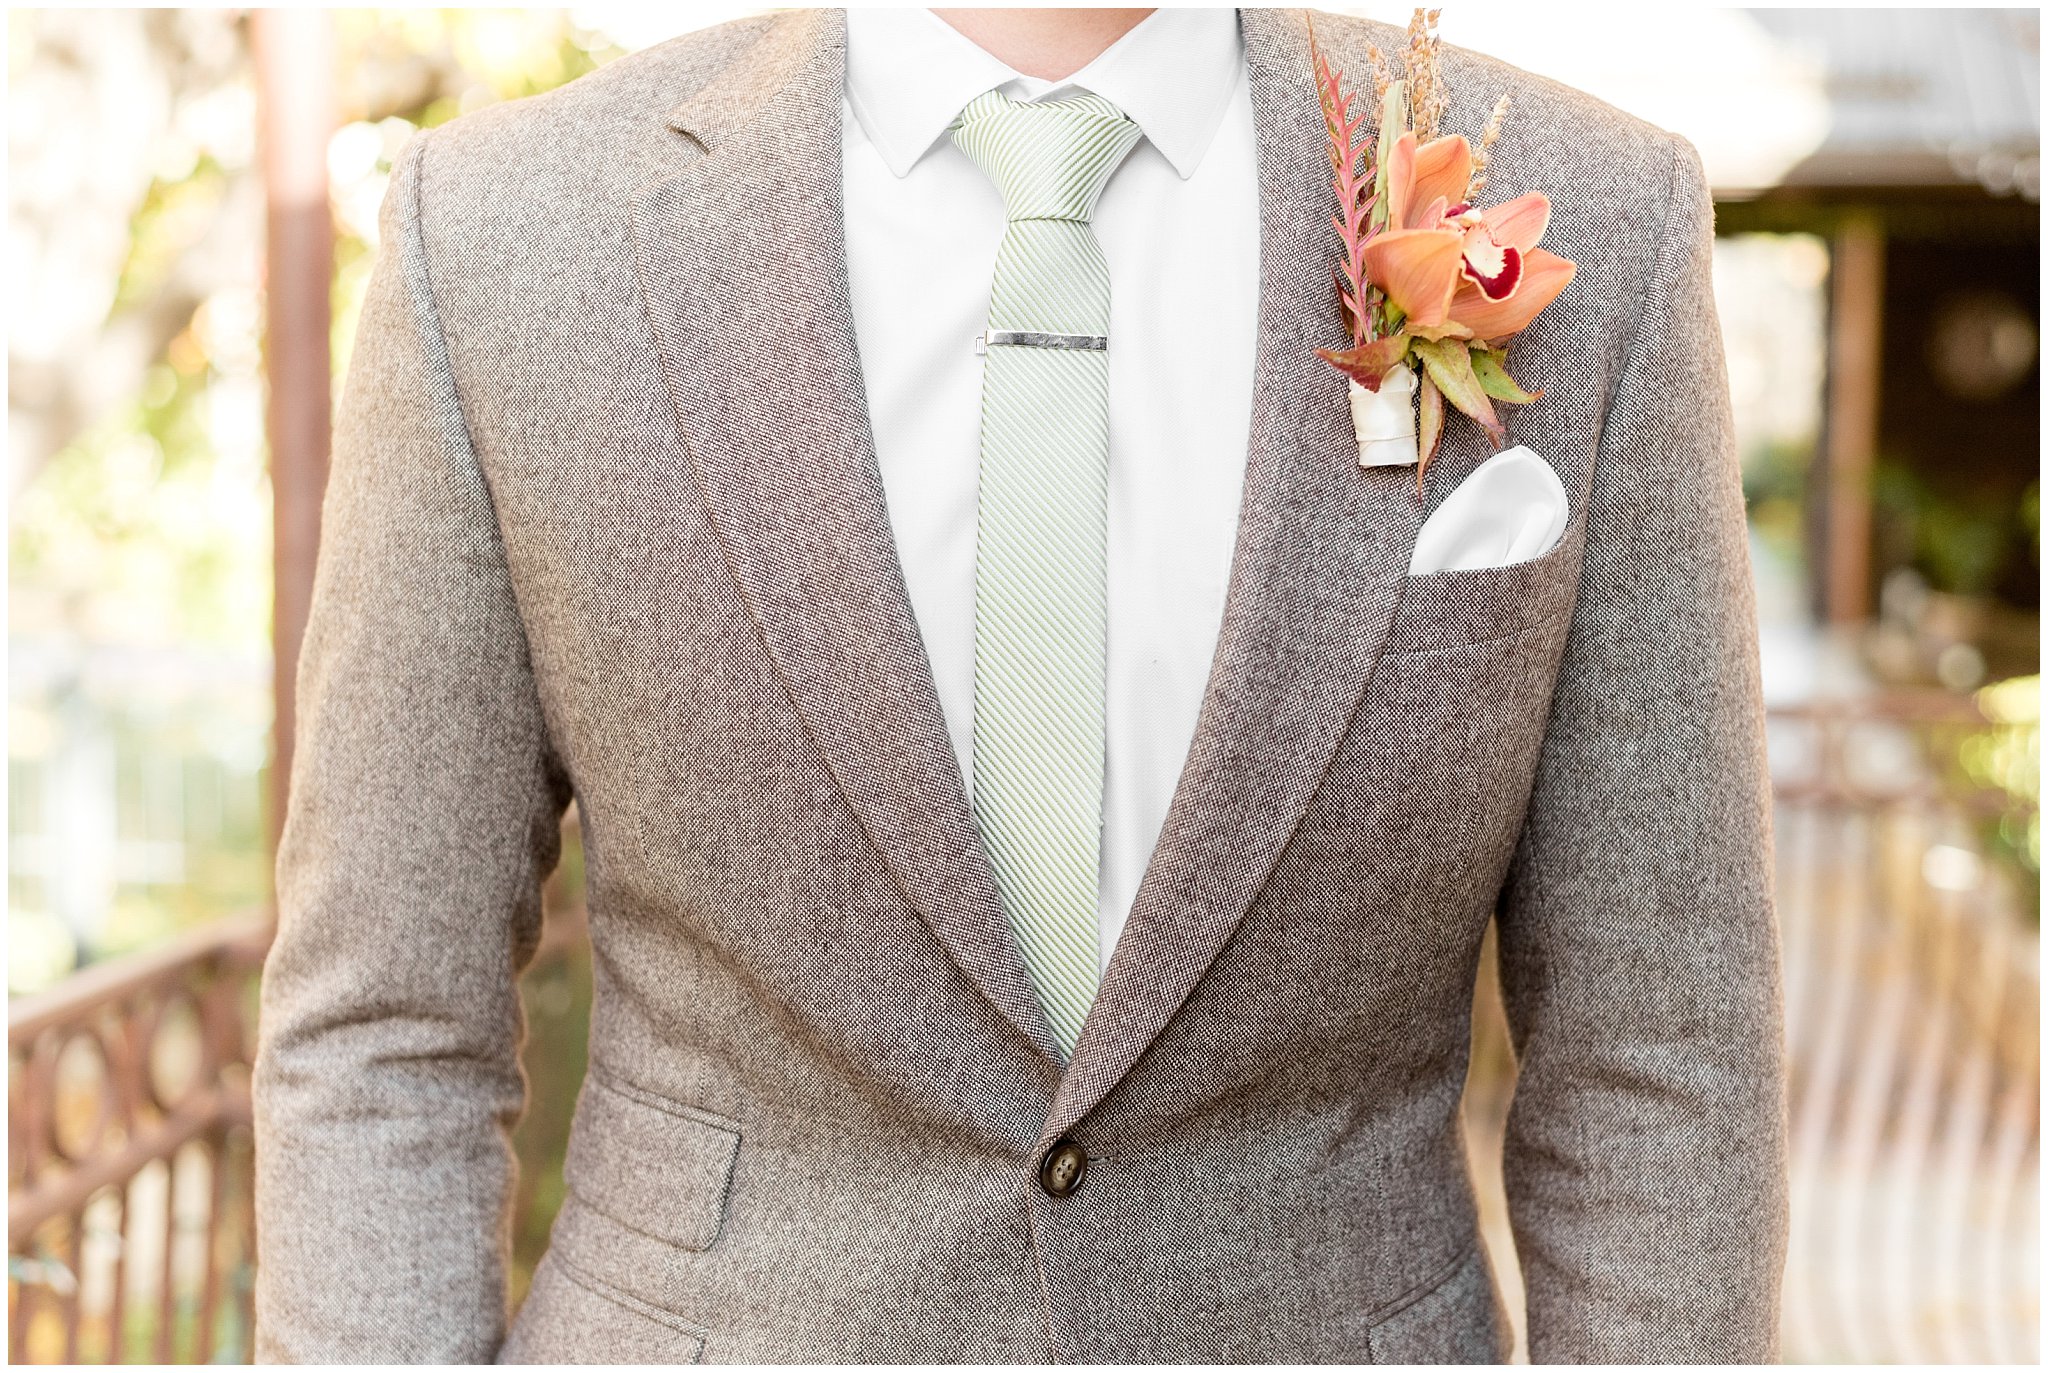 Groom in custom fit light brown suit and mint green tie | Wadley Farms Elegant Utah Wedding | Jessie and Dallin Photography